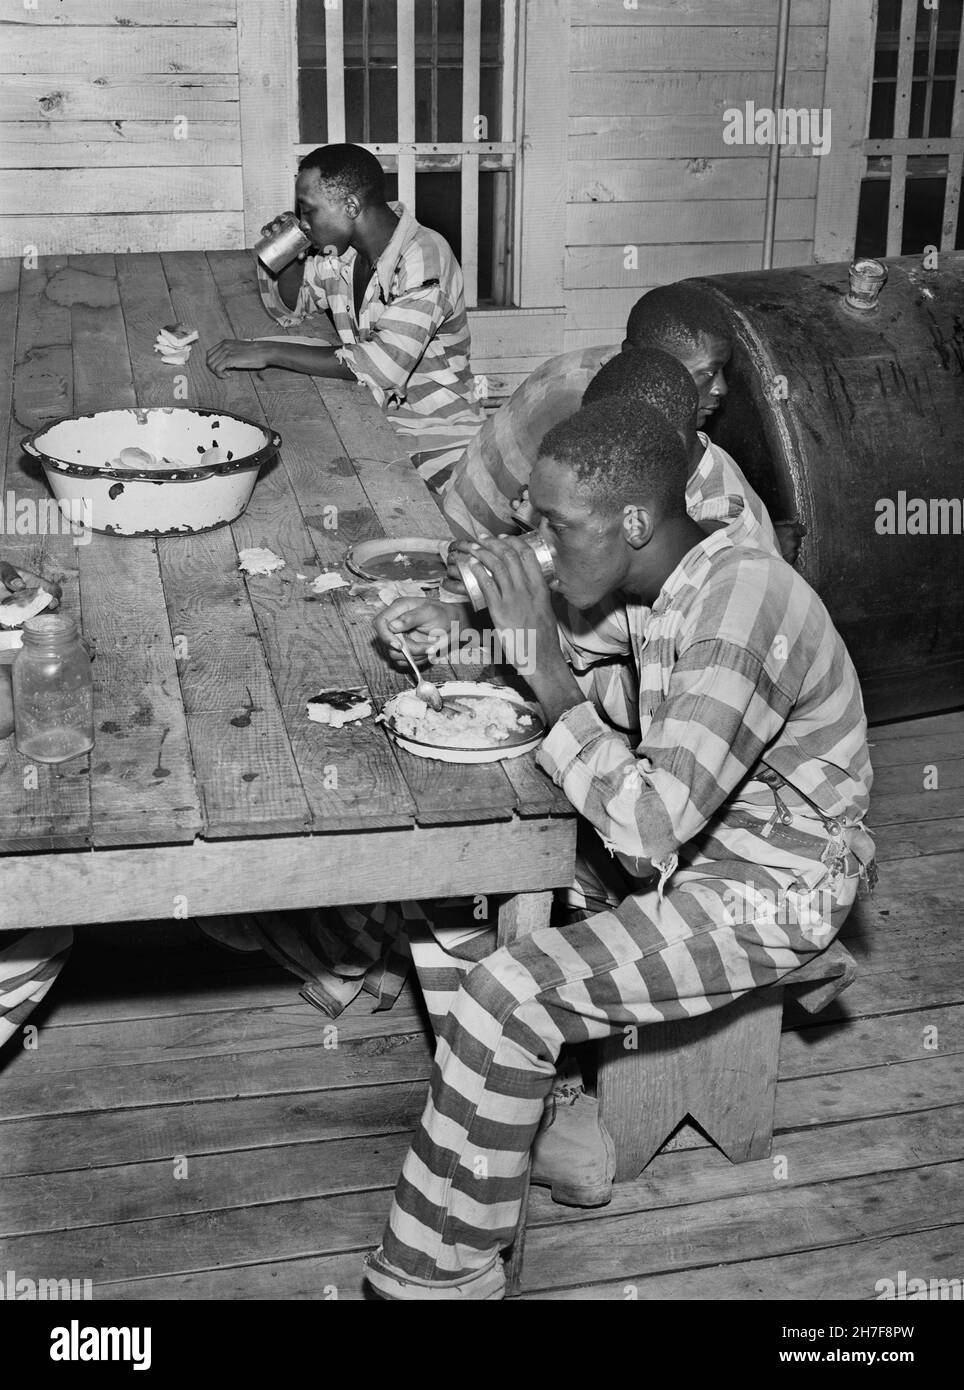 Convicts eating Dinner, Greene County, Georgia, USA, Jack Delano, U.S. Farm Security Administration, U.S. Office of War Information Photograph Collection, June 1941 Stock Photo